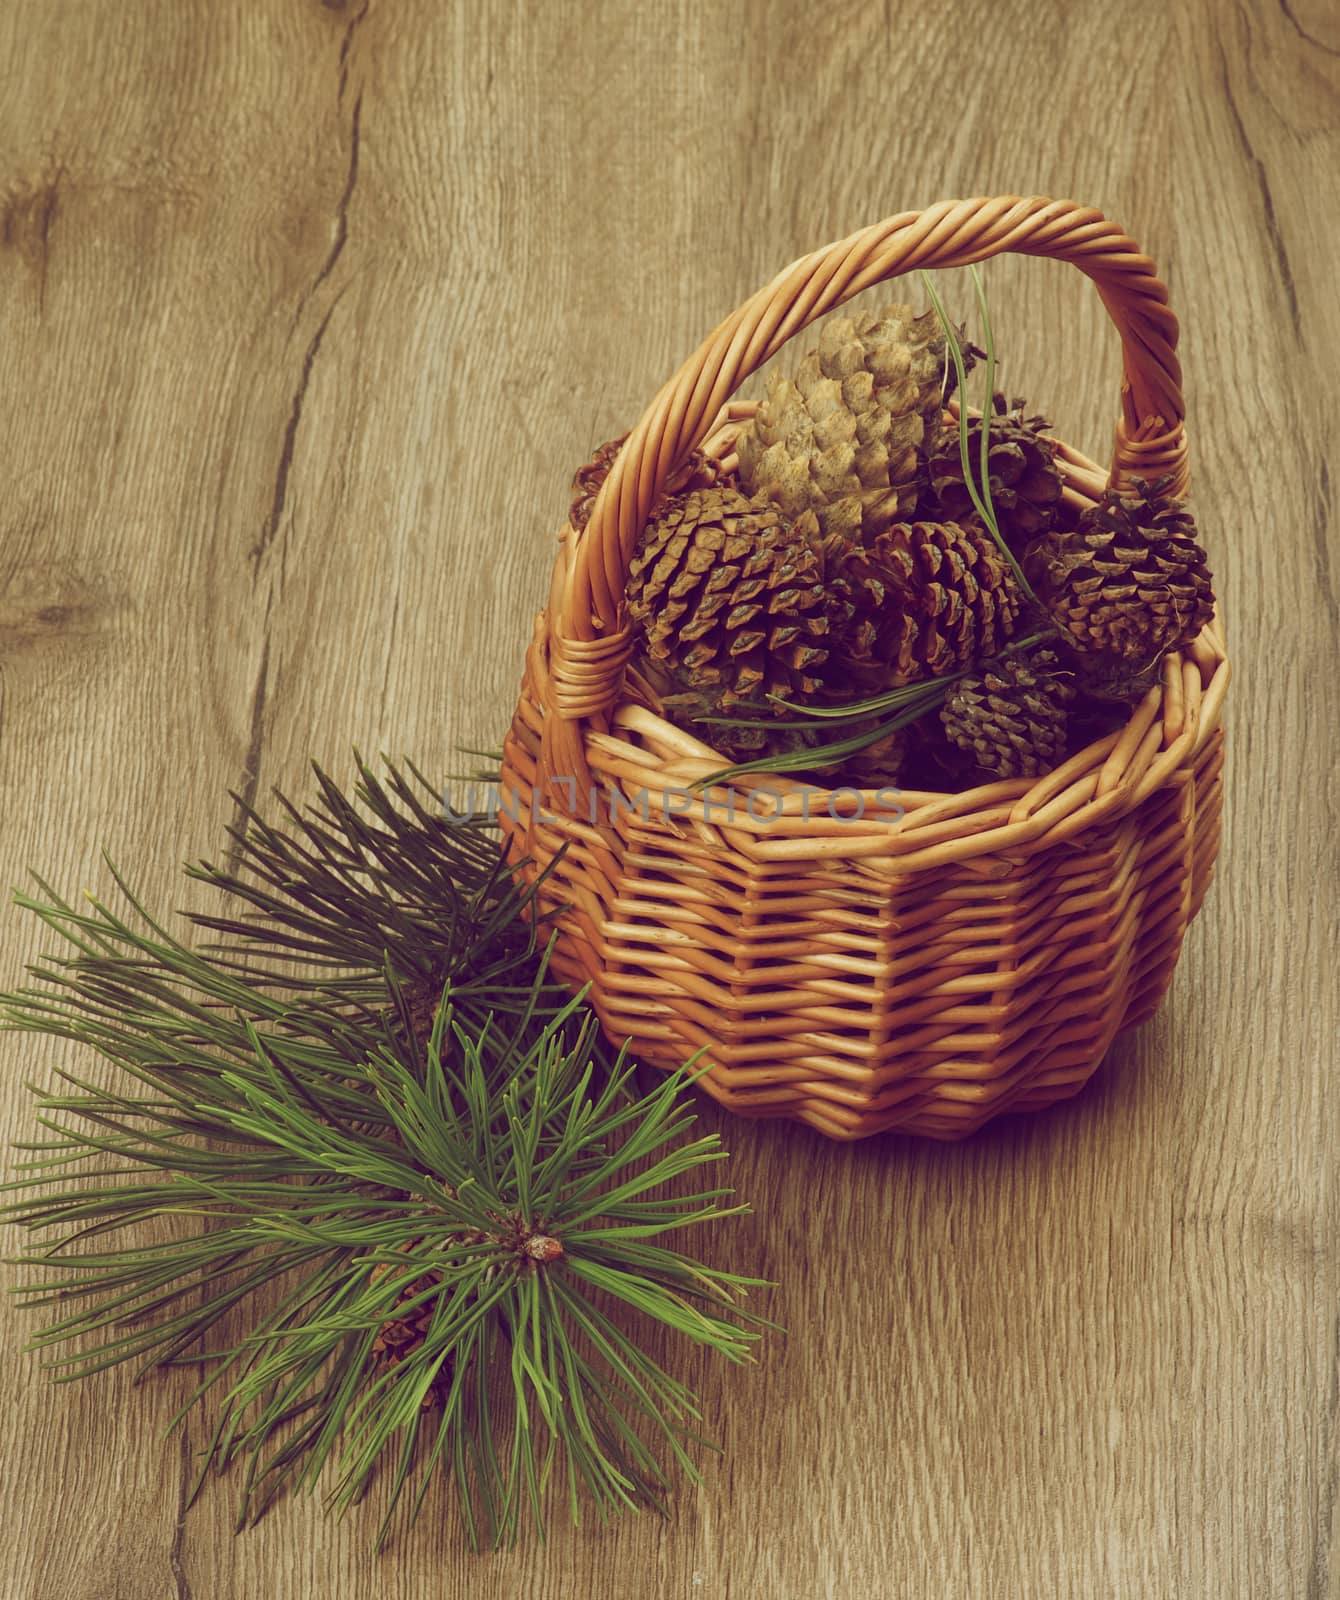 Fir Cones and Branches by zhekos